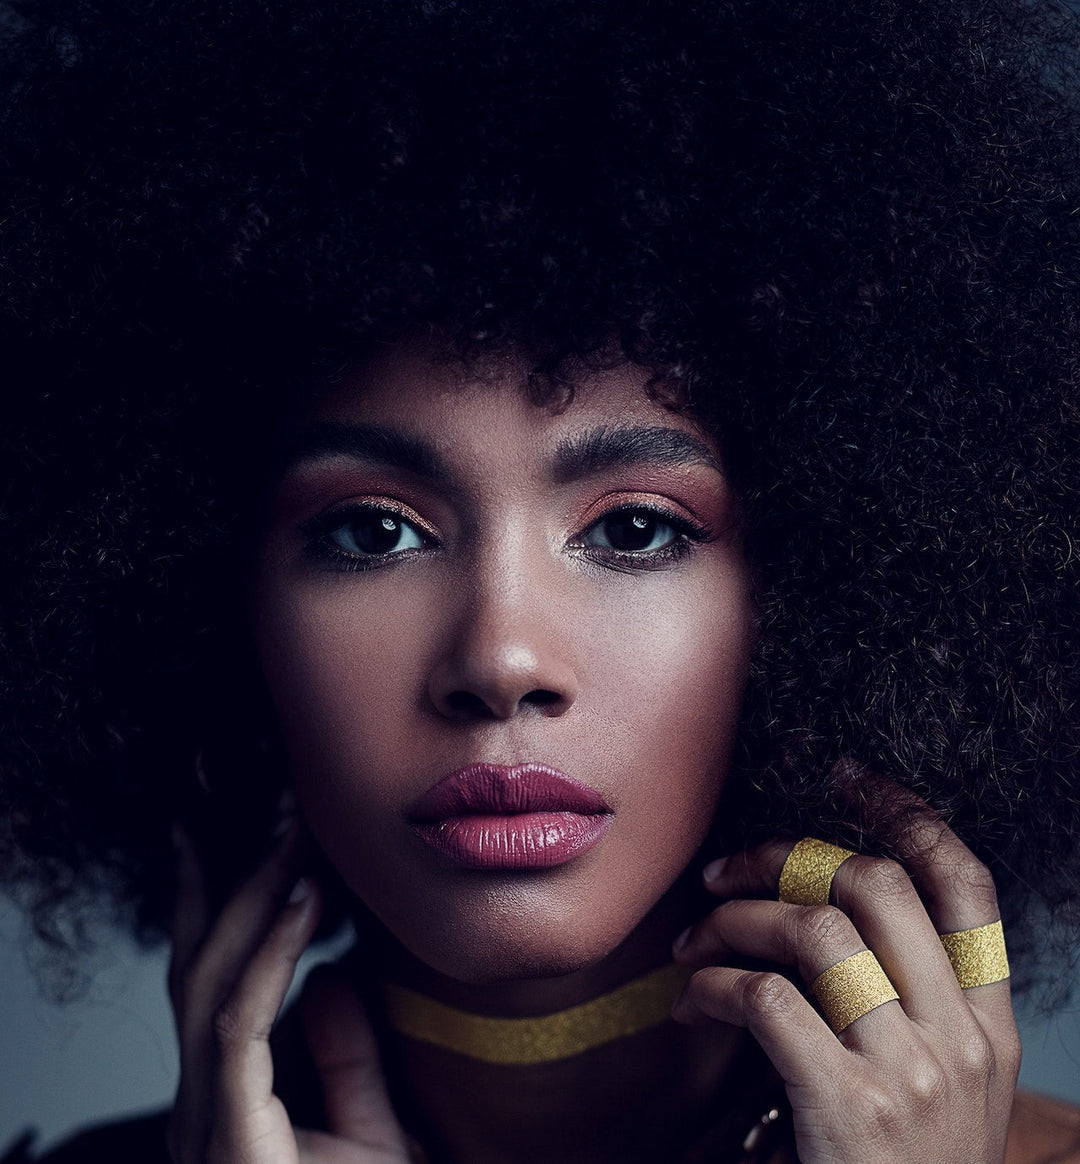 A Black woman wearing her natural hair while wearing make-up and gold rings